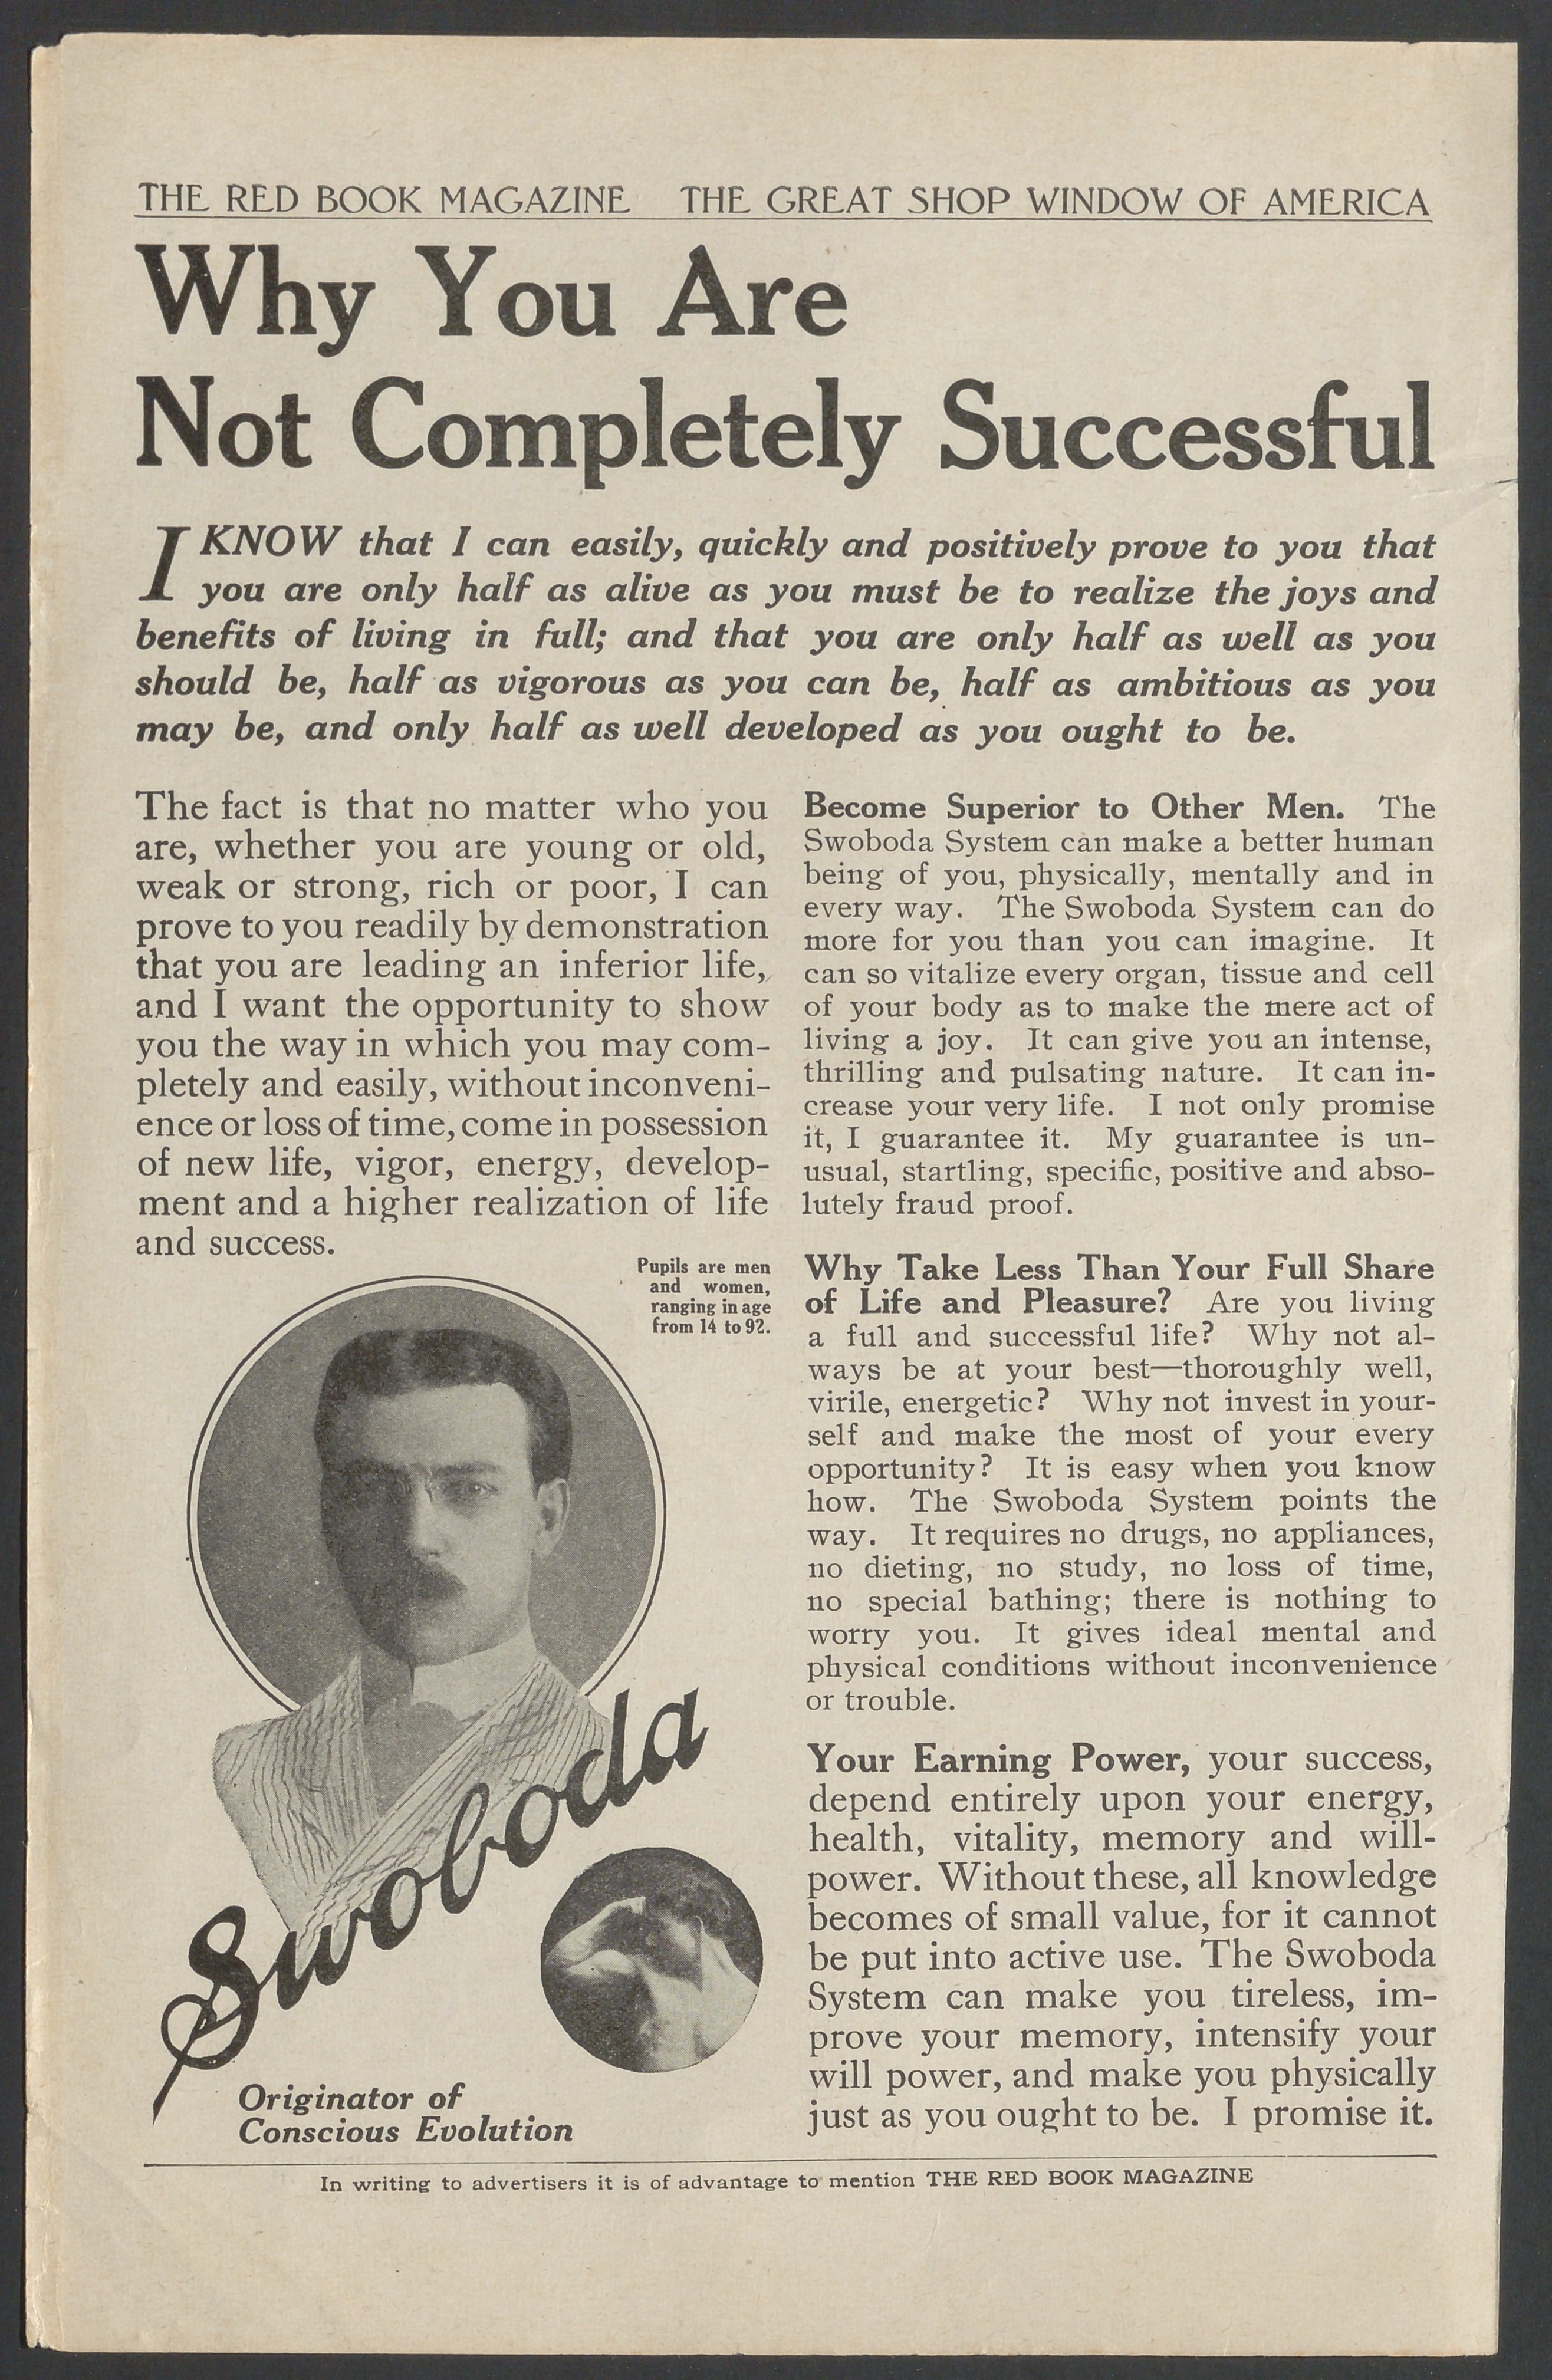 Advertisement for the "Swoboda System". Mostly text, with some portrait images.